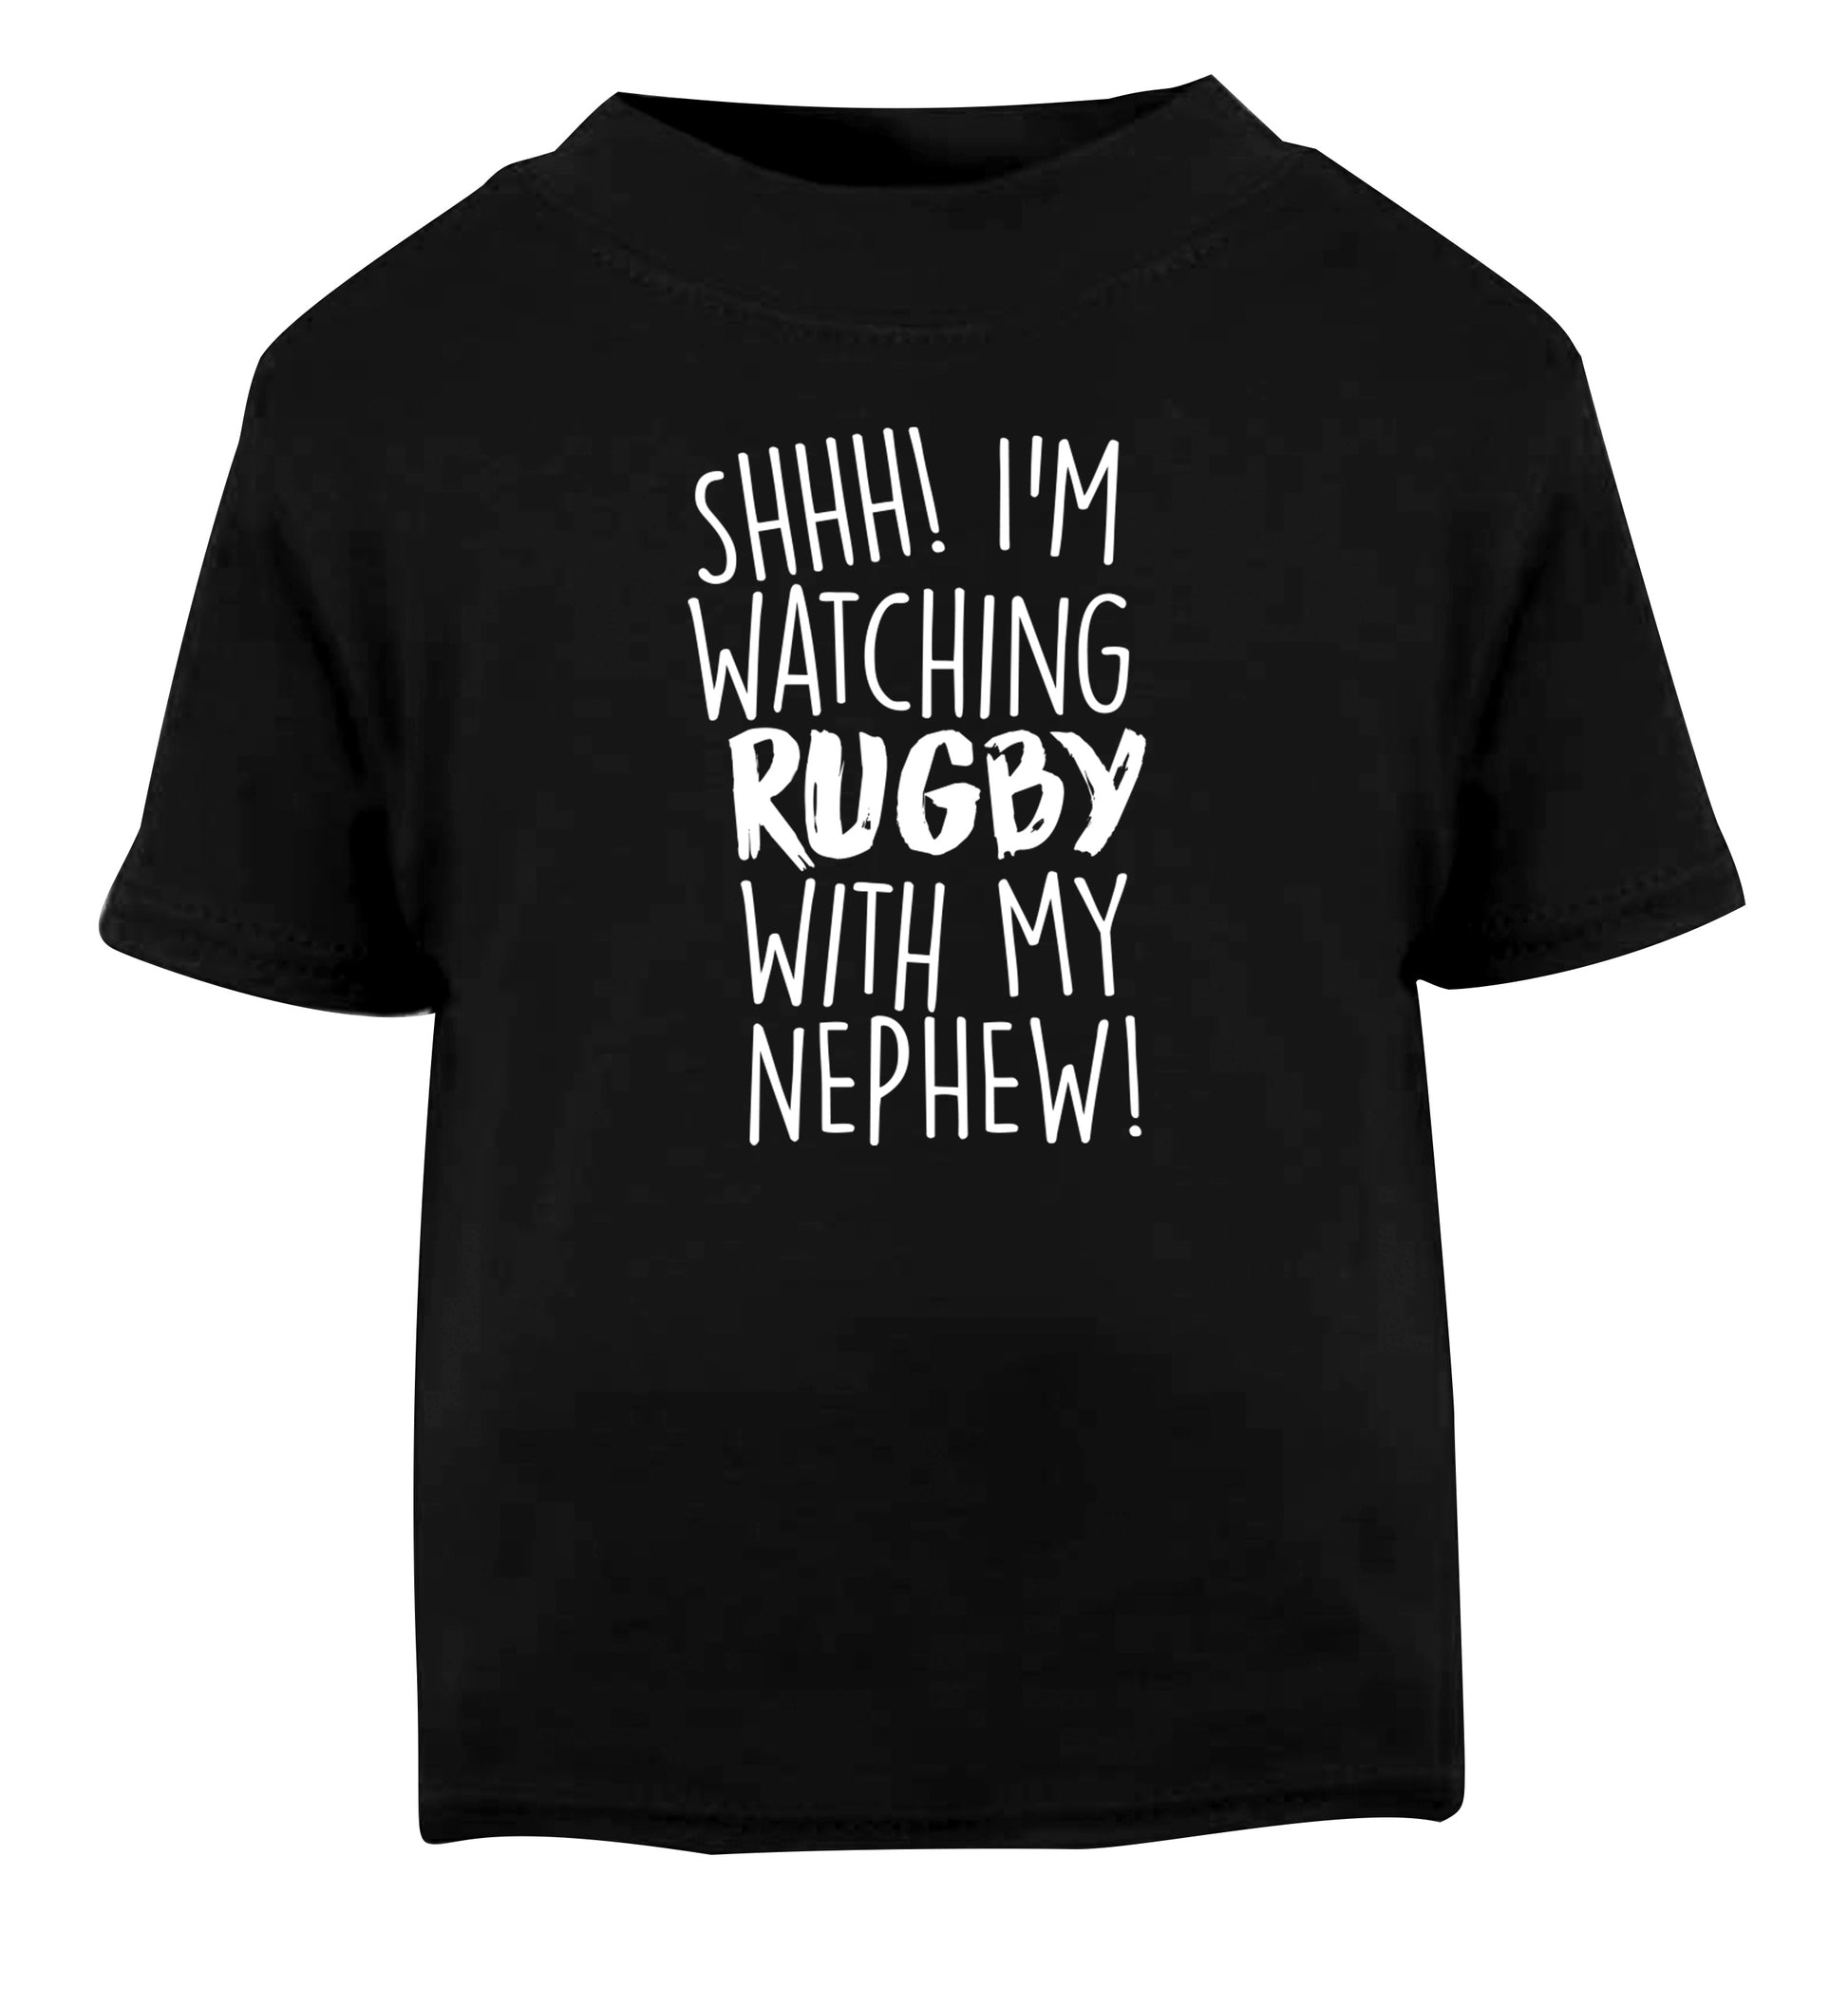 Shh.. I'm watching rugby with my nephew Black Baby Toddler Tshirt 2 years